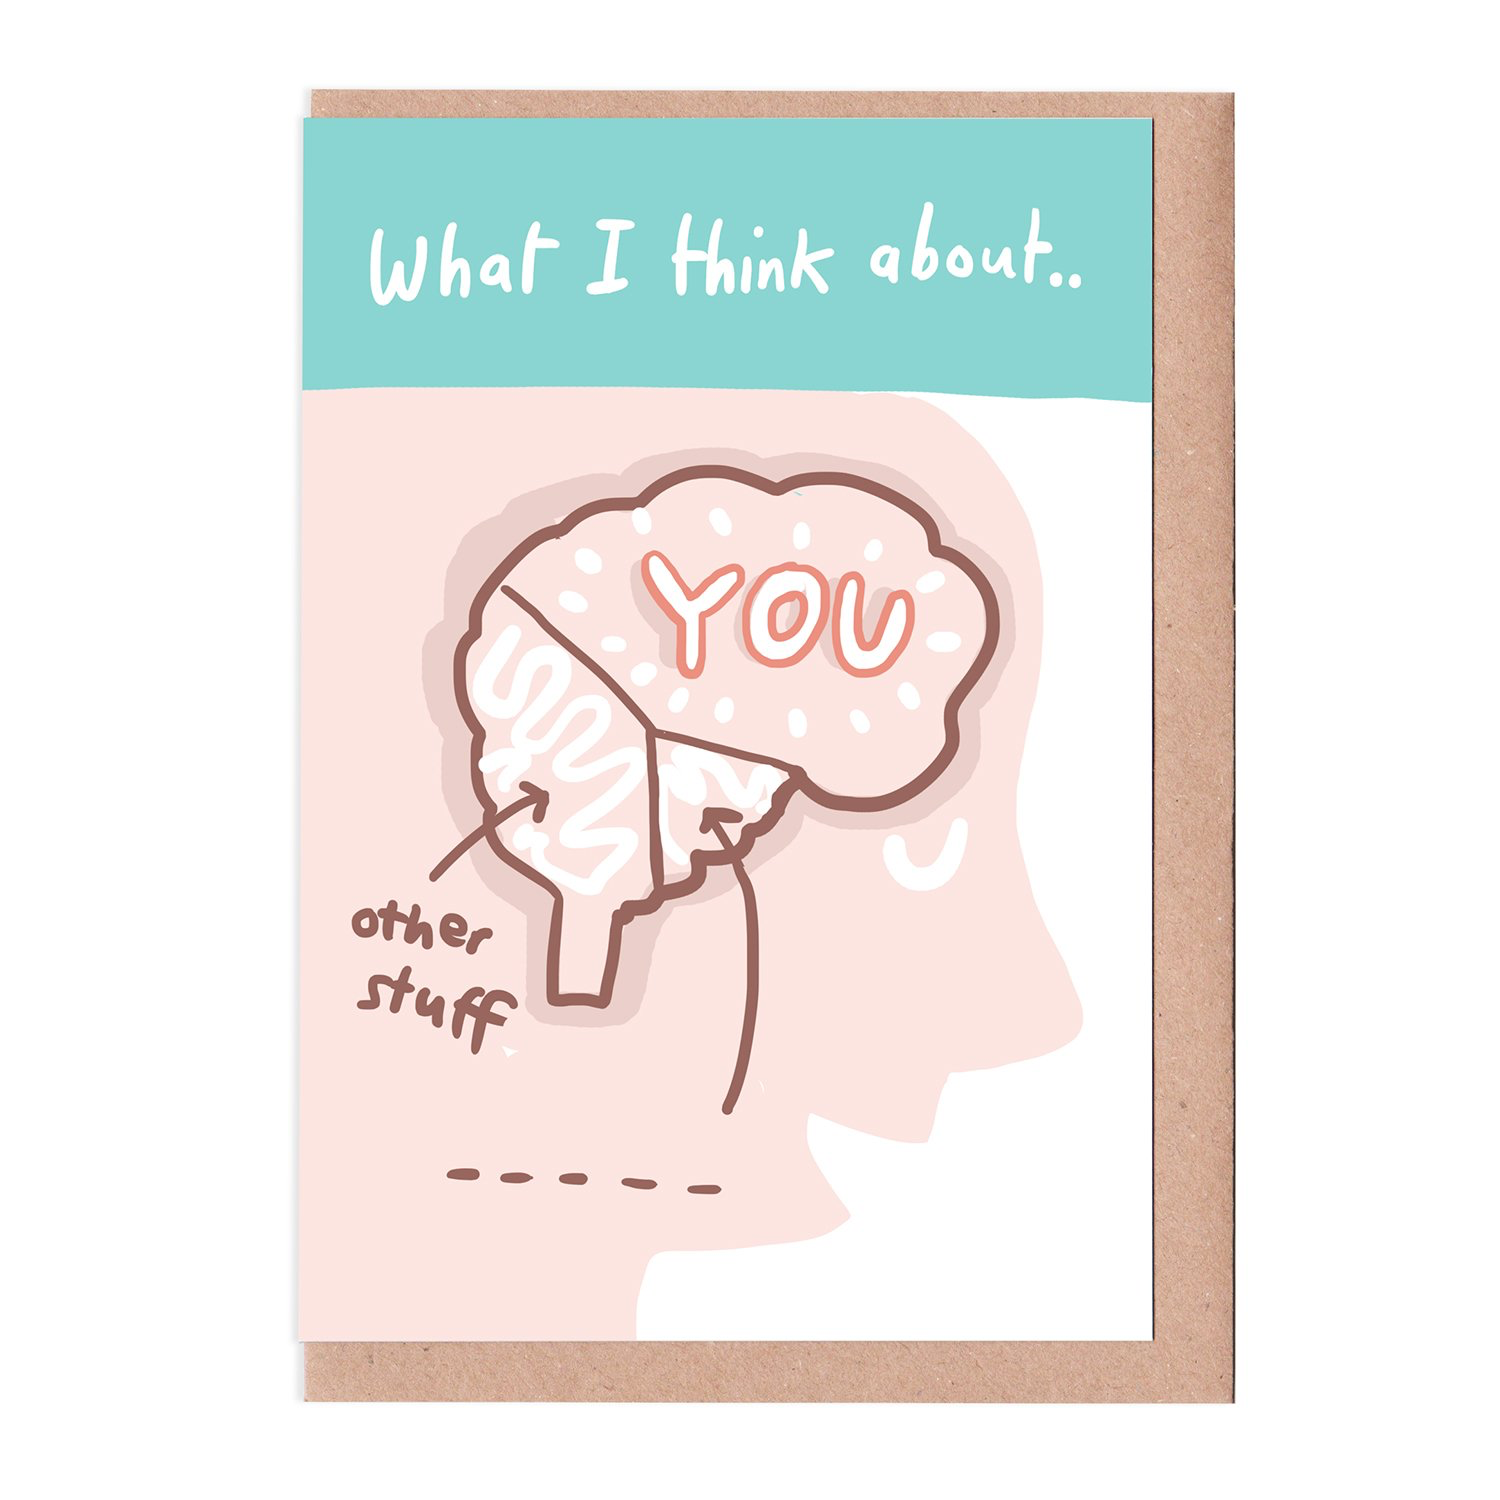 Sarah Ray What I think about - you card. Illustrative drawing of a brain.